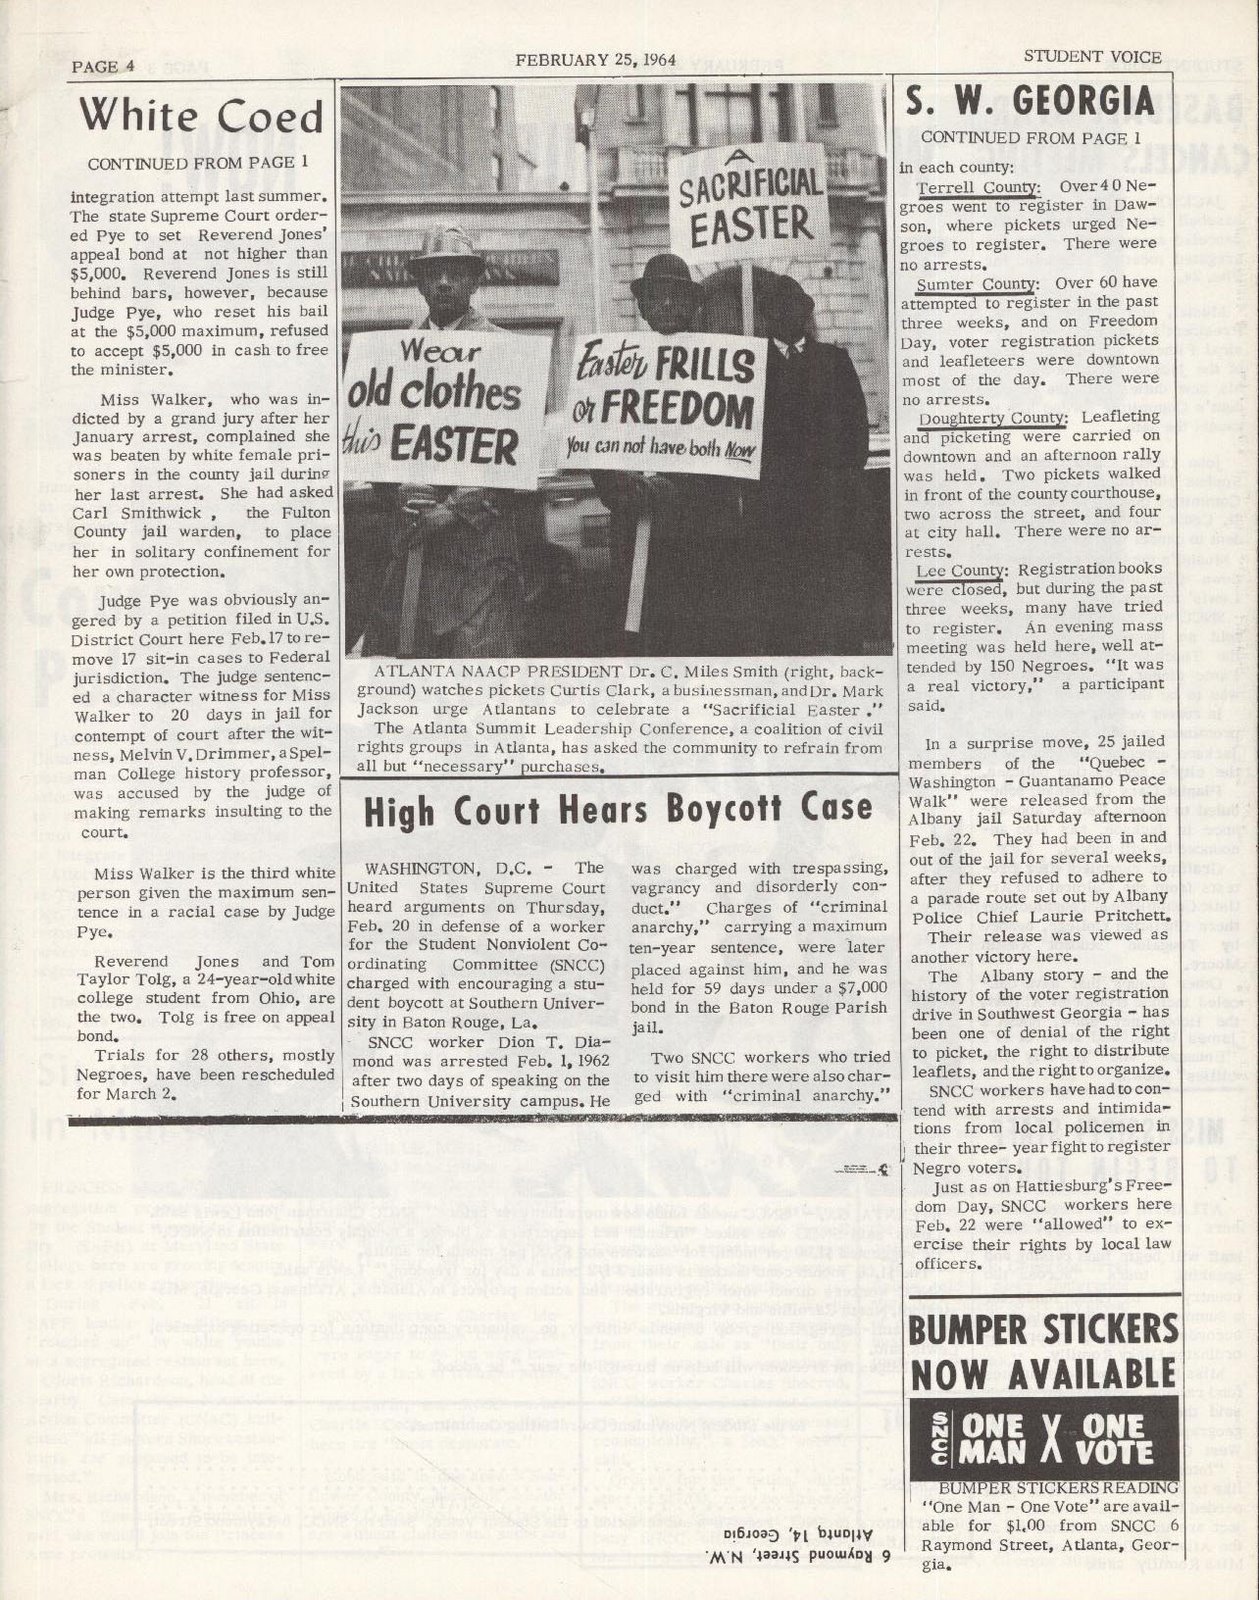 Student Voice newspaper excerpt featuring an article on racial integration